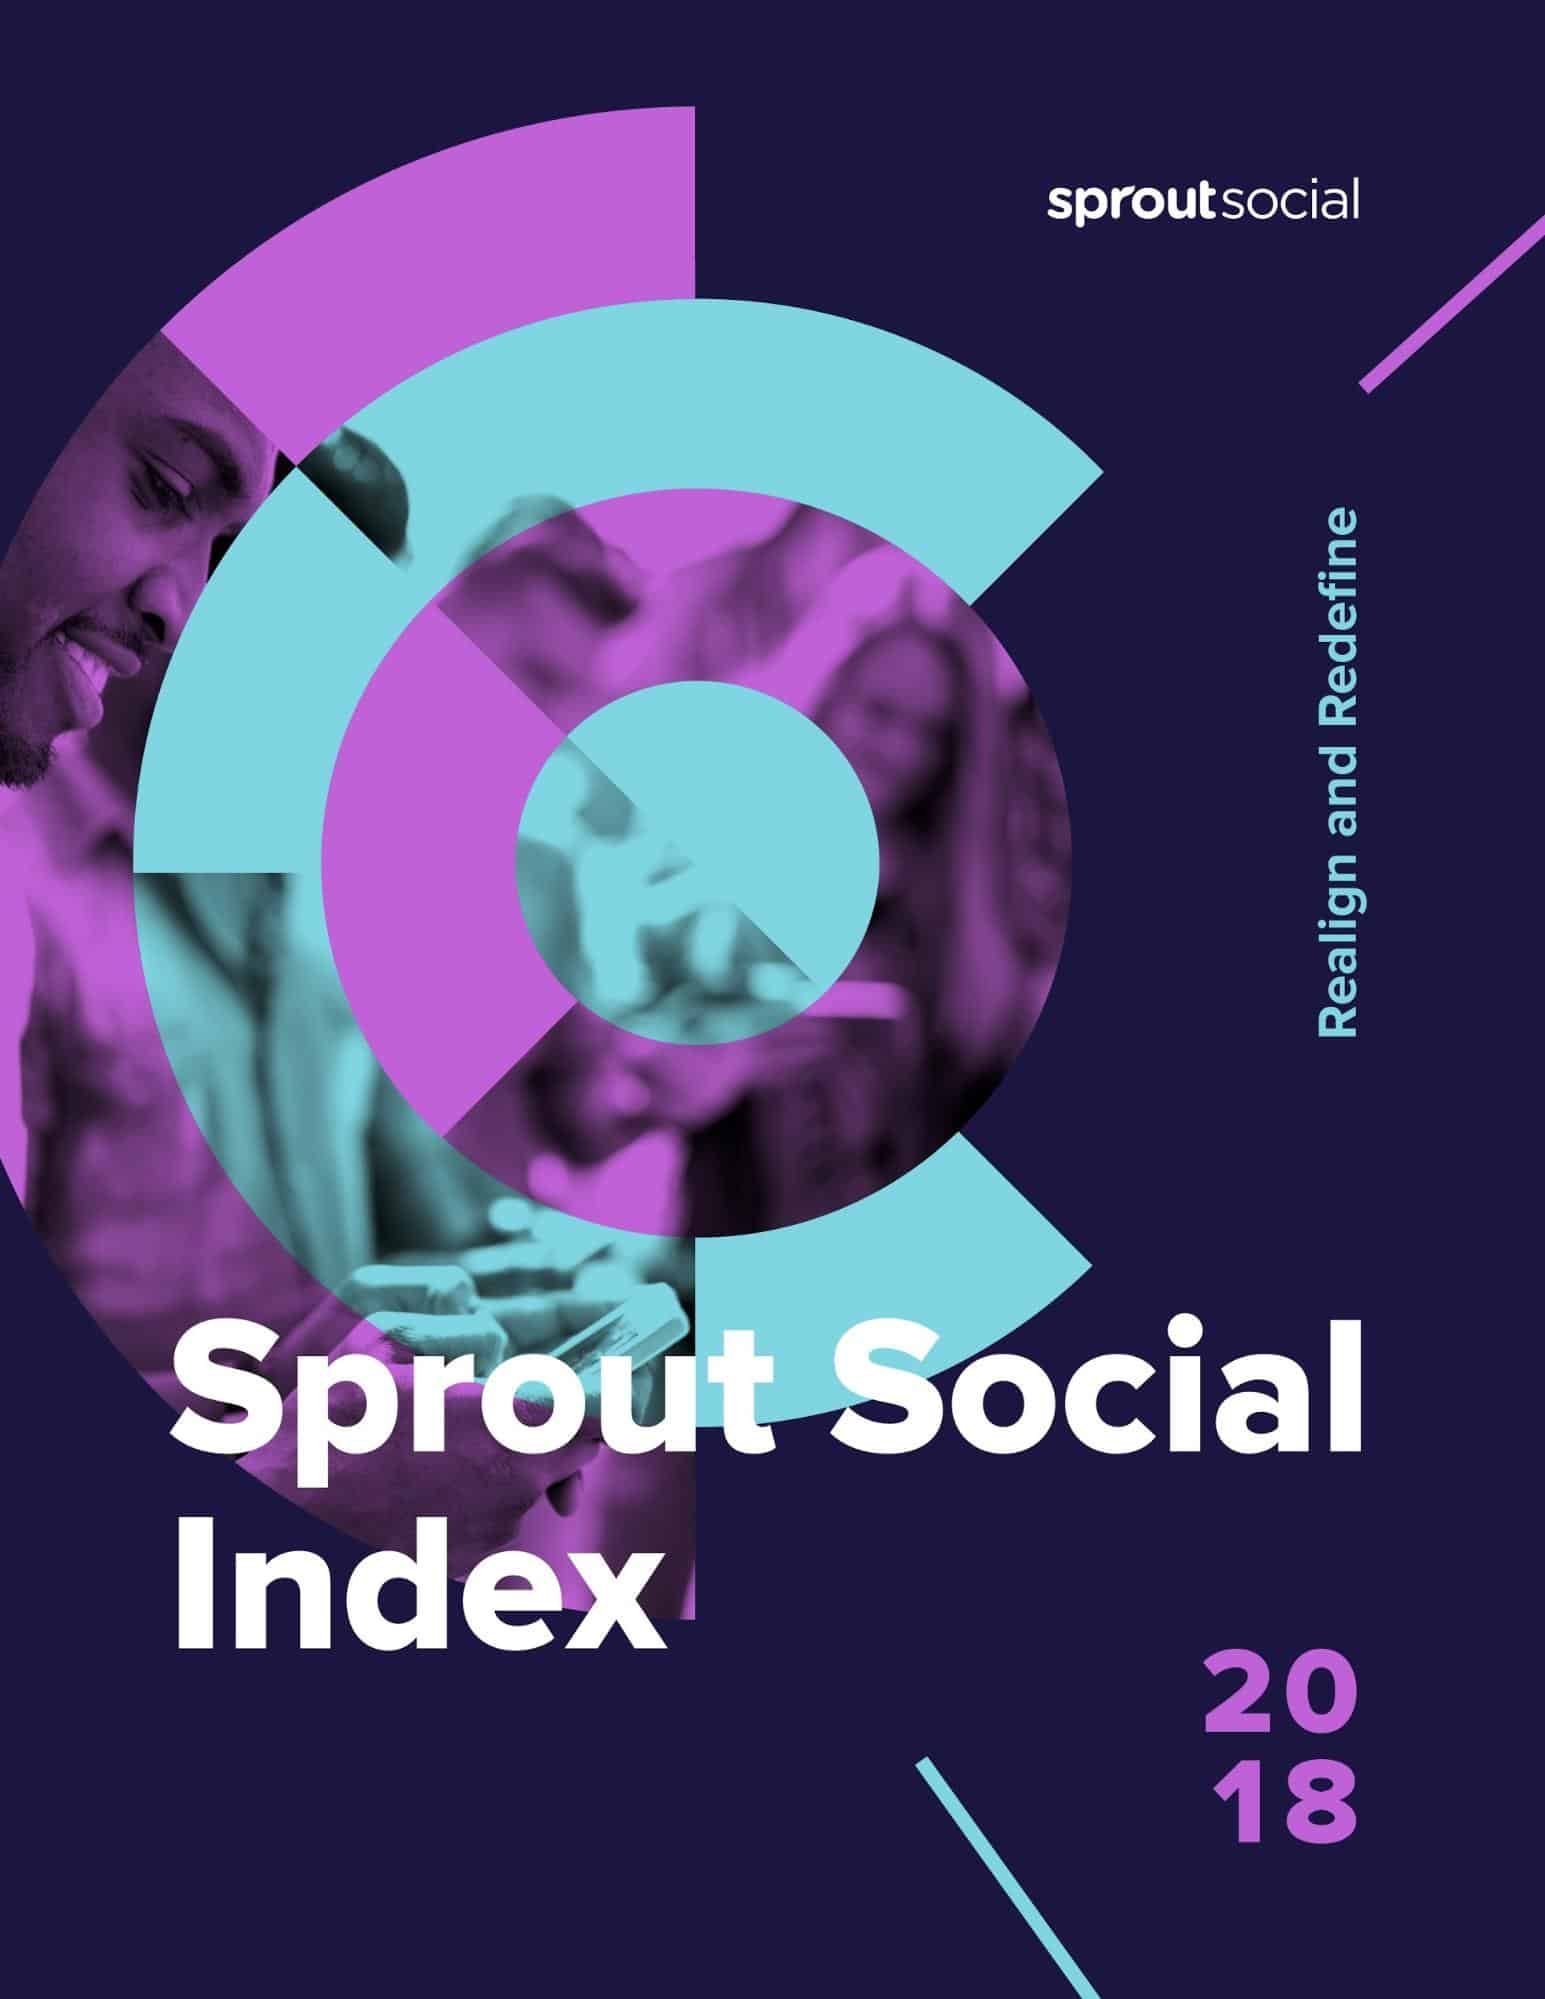 sprout social free ebook, free ebook example